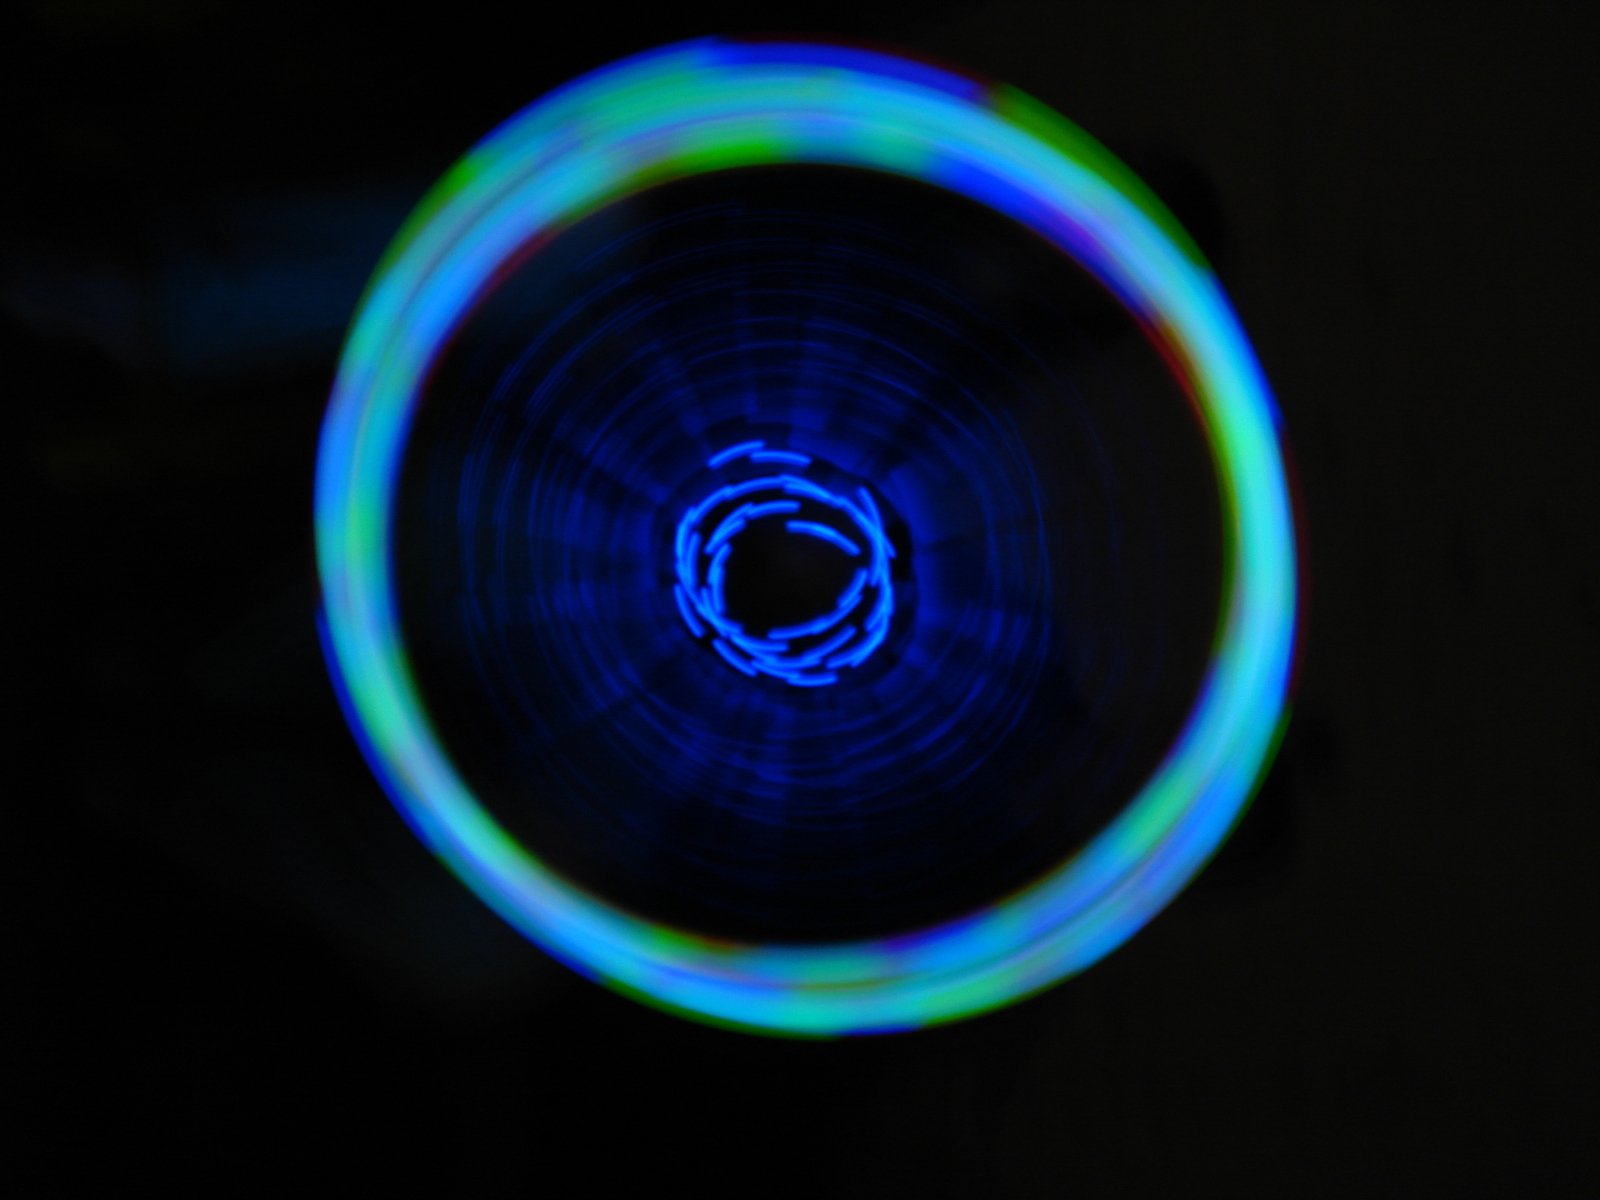 a disc with a light blue center in the middle